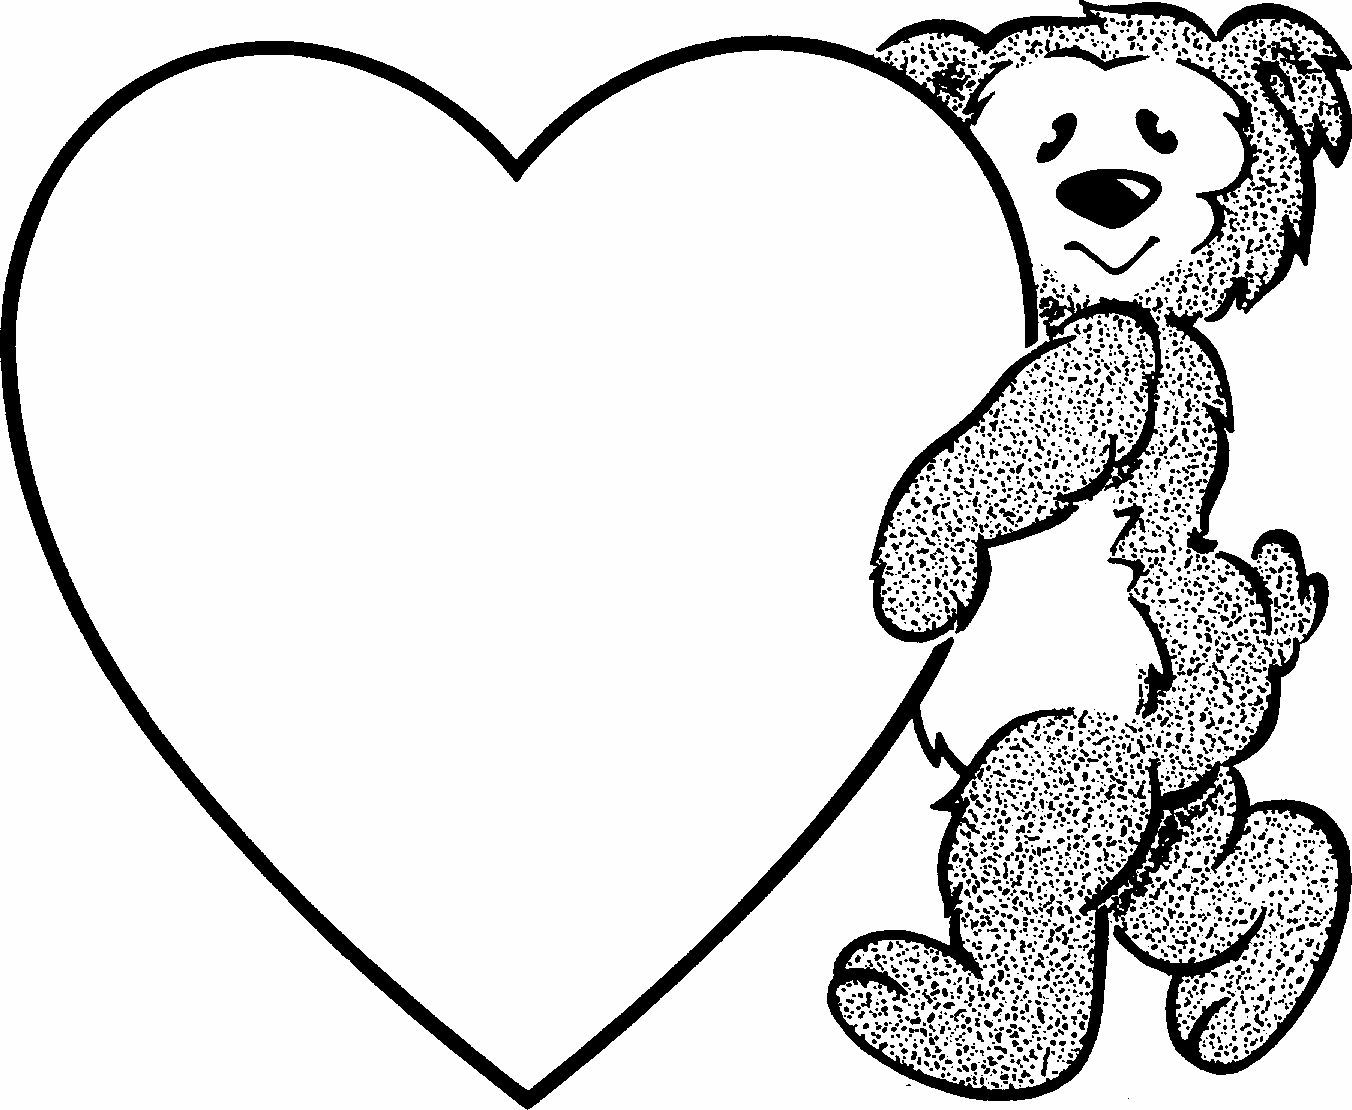 Valentines Day Hearts Coloring Pages Free Coloring Hearts Cliparts Download Free Clip Art Free Clip Art